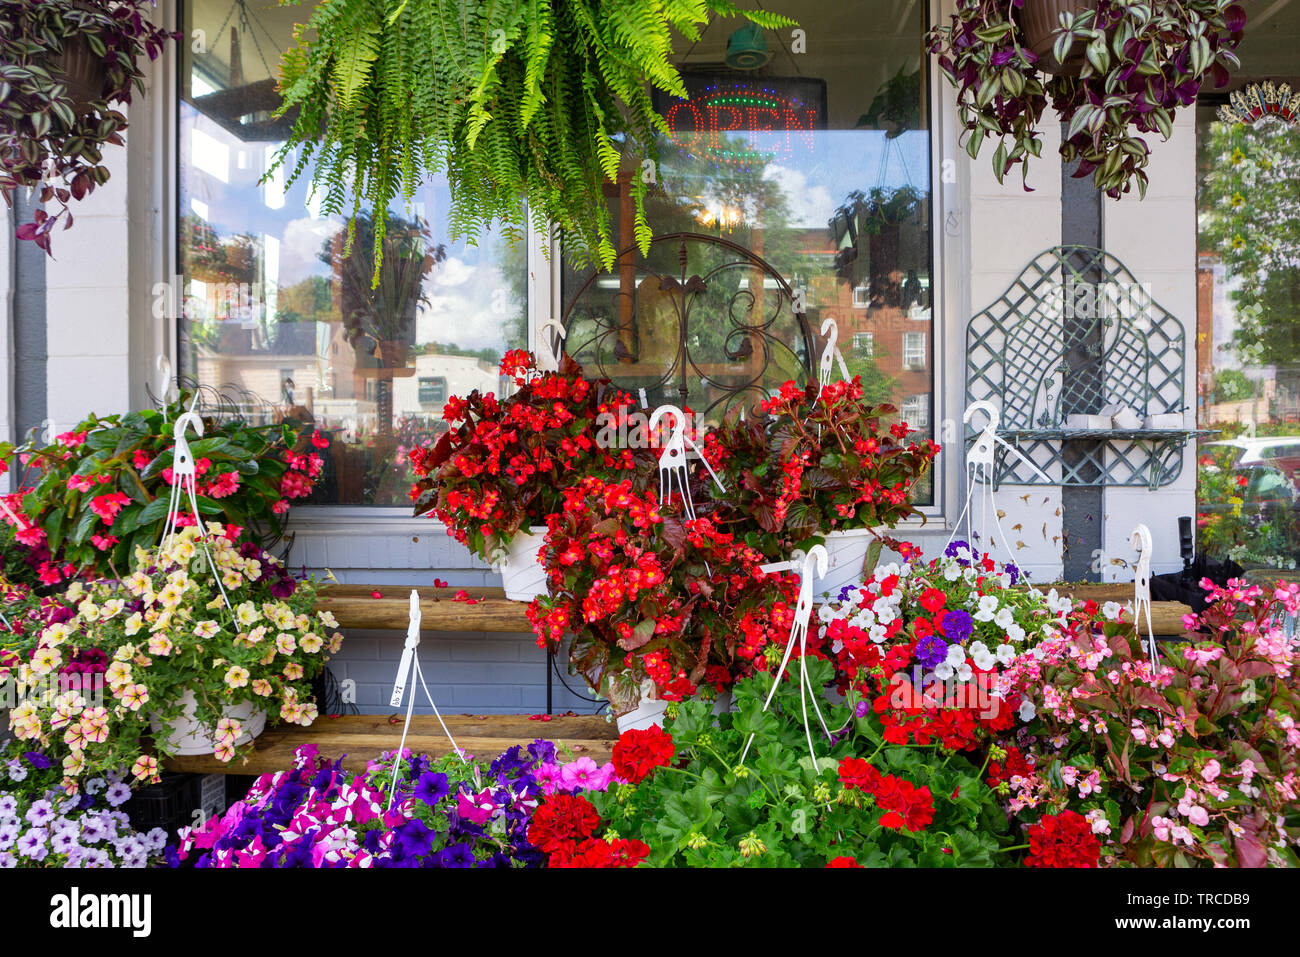 Small business flower shop with potted hanging plants Stock Photo